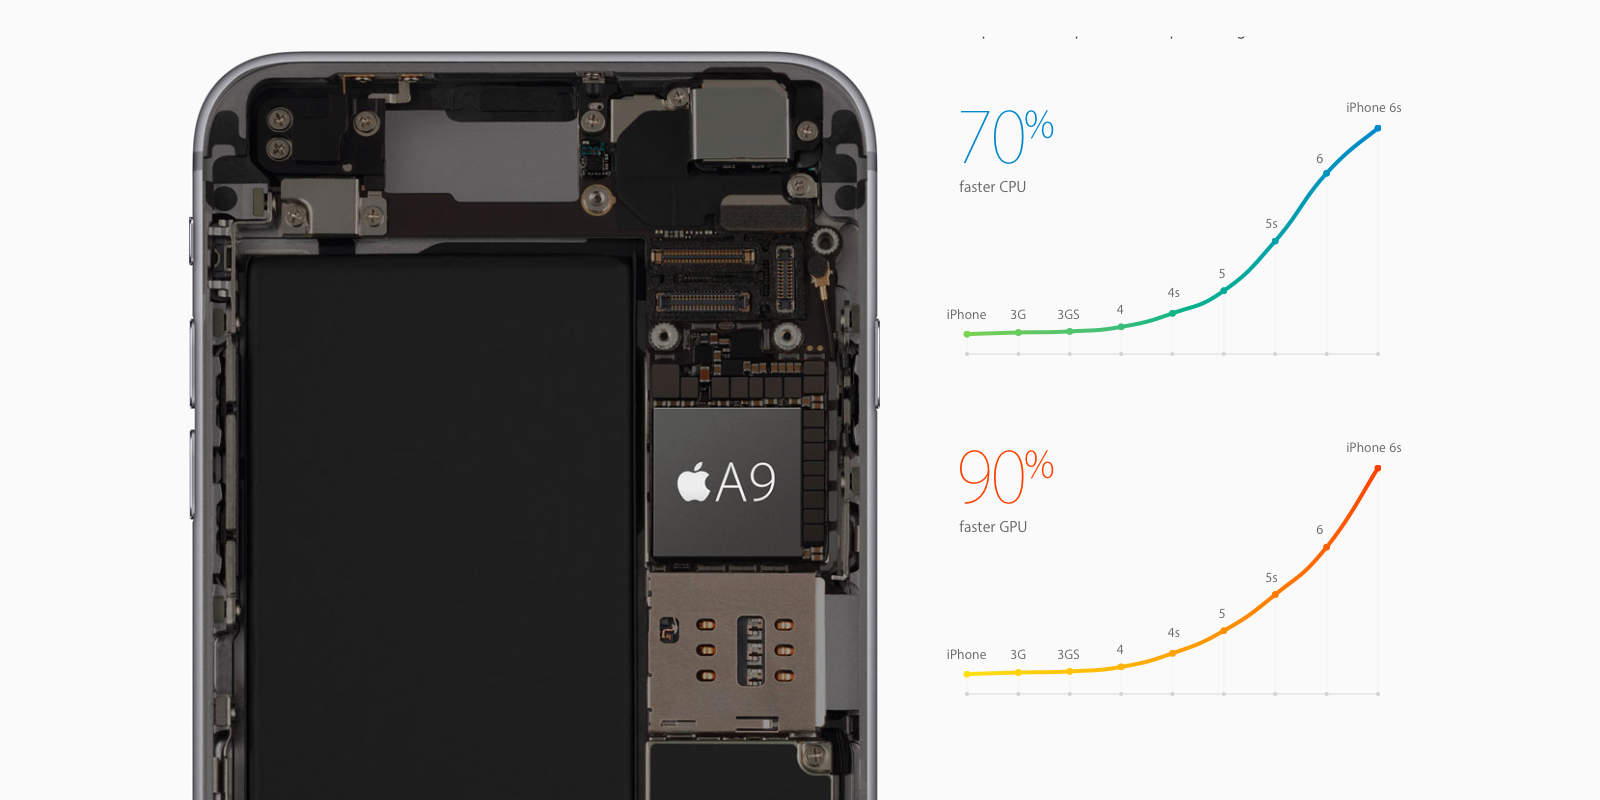 The A9X chip puts iPhone 6s graphics to shame.